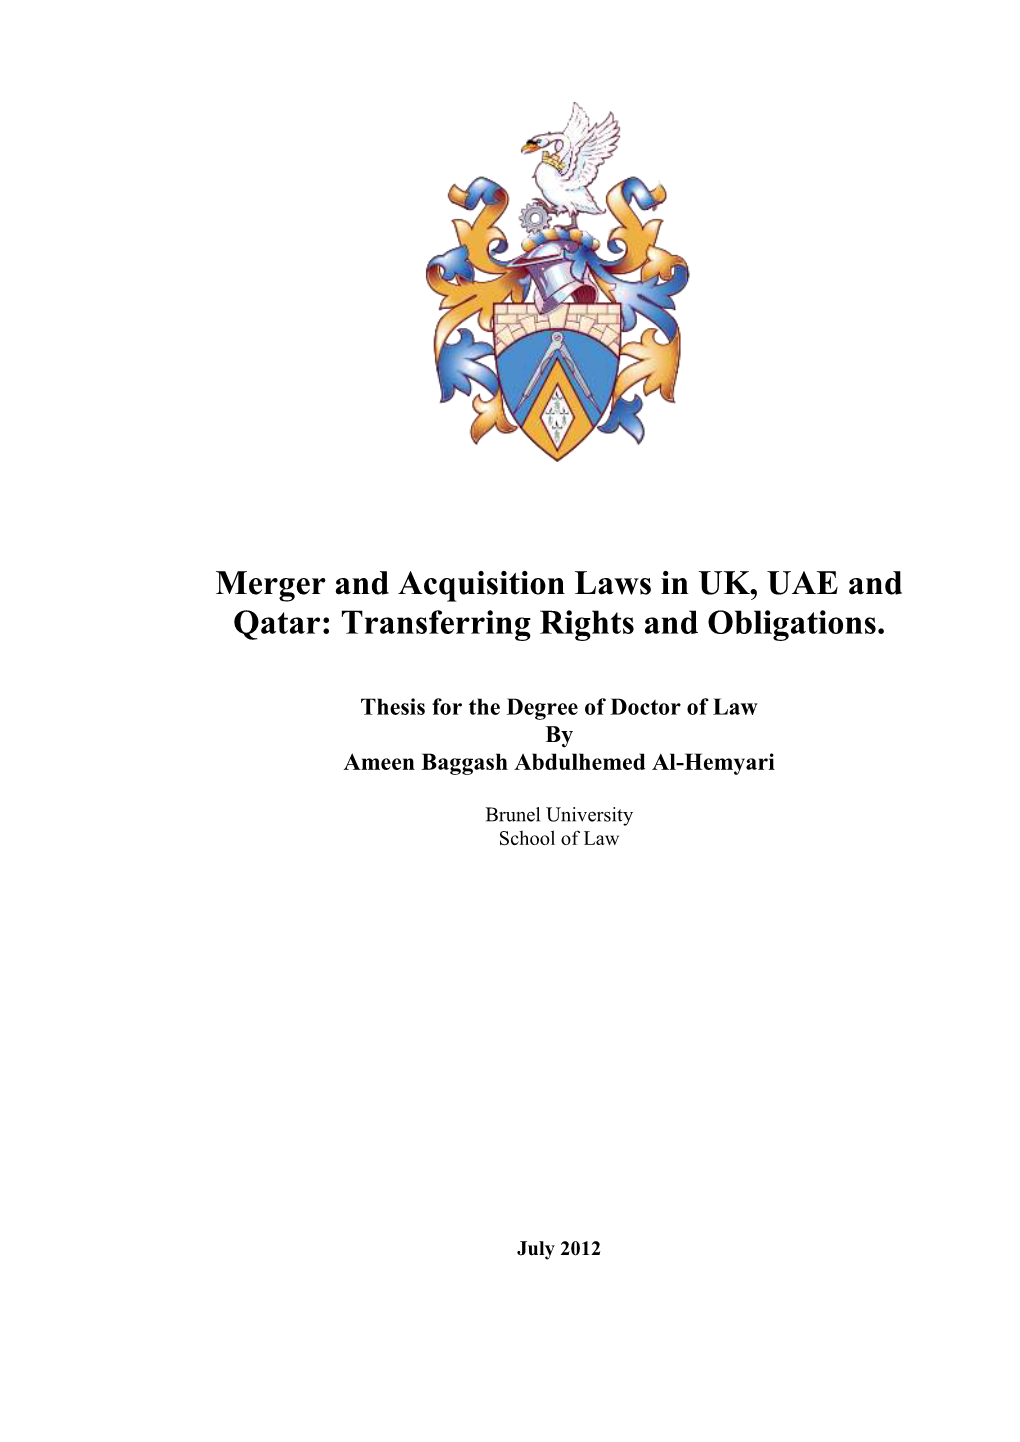 Merger and Acquisition Laws in UK, UAE and Qatar: Transferring Rights and Obligations